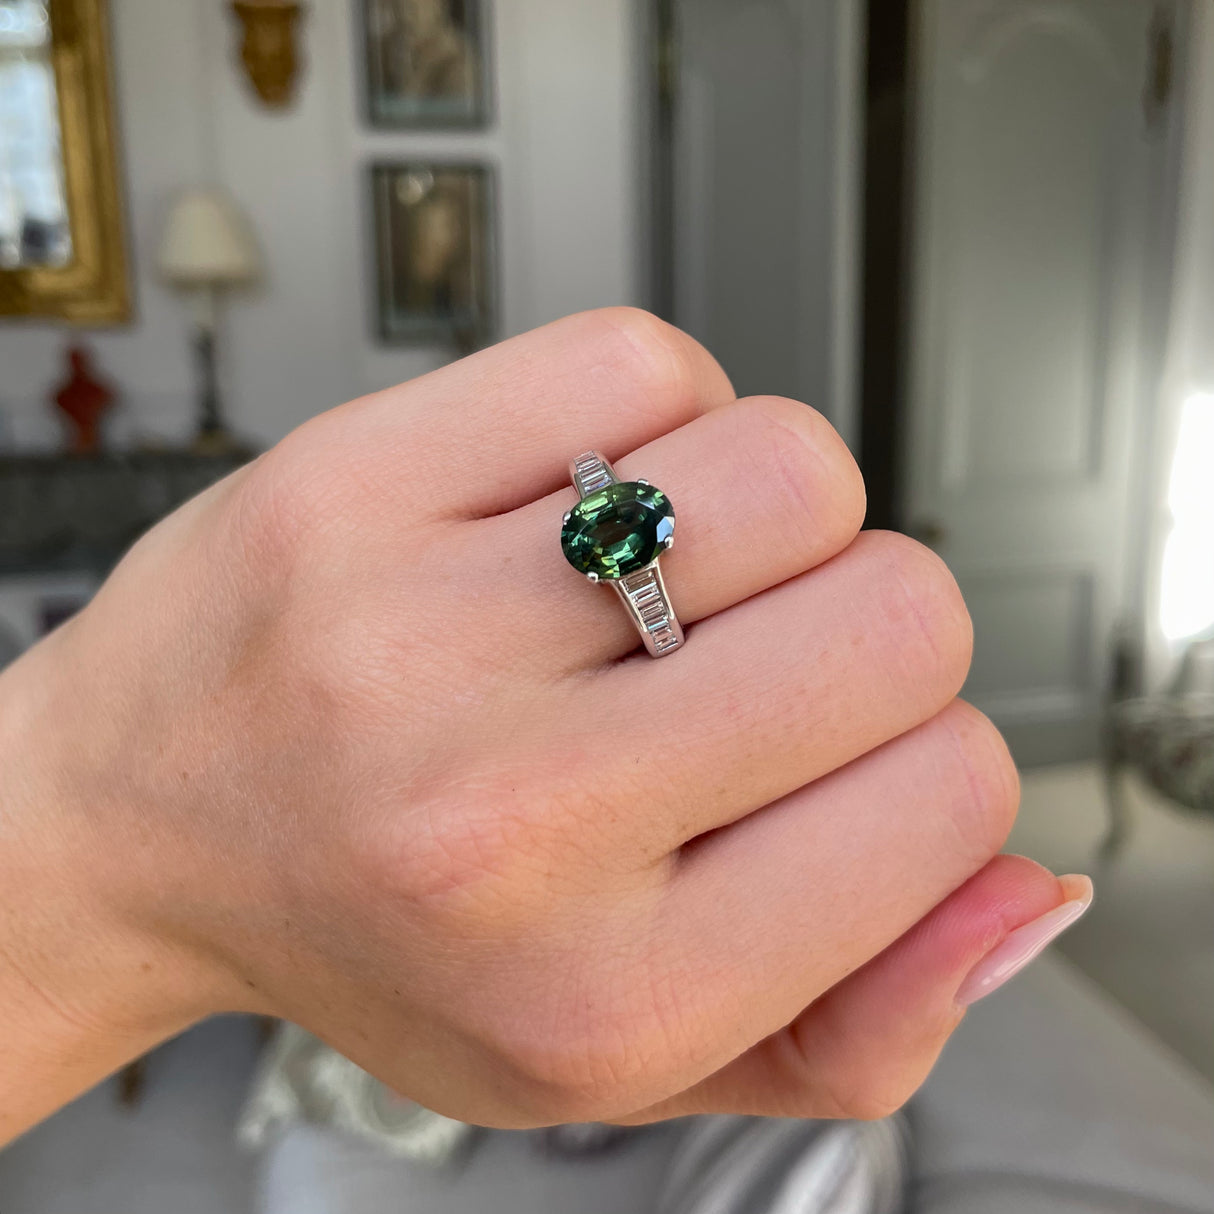 Green sapphire and diamond engagement ring worn on closed hand.